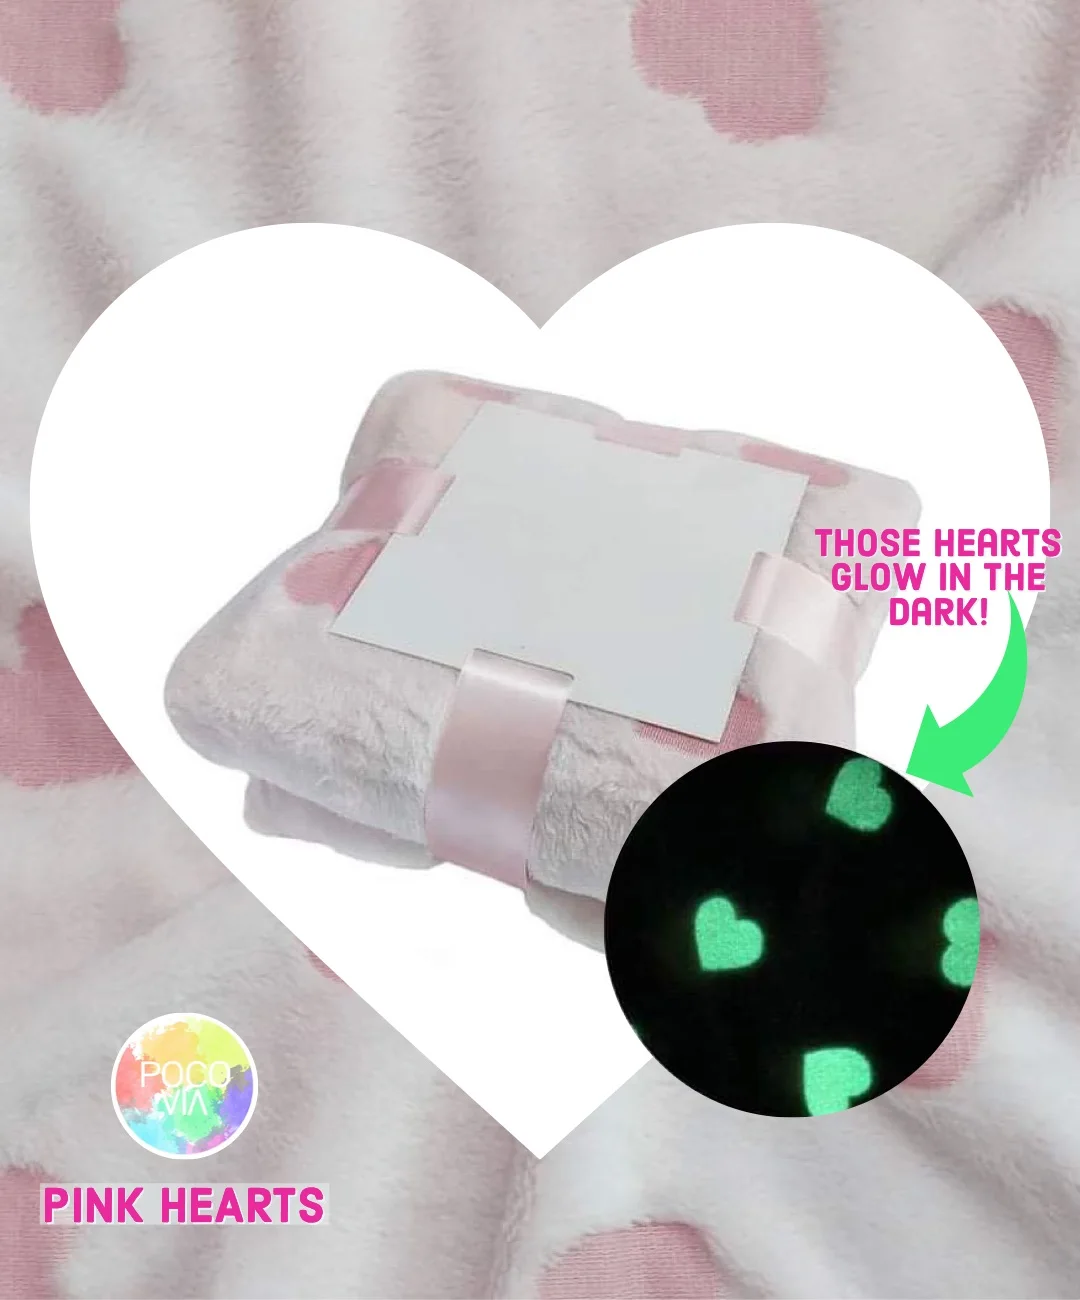 Glow in the Dark High Quality Fleece Blanket - Pink Hearts (Double Size)